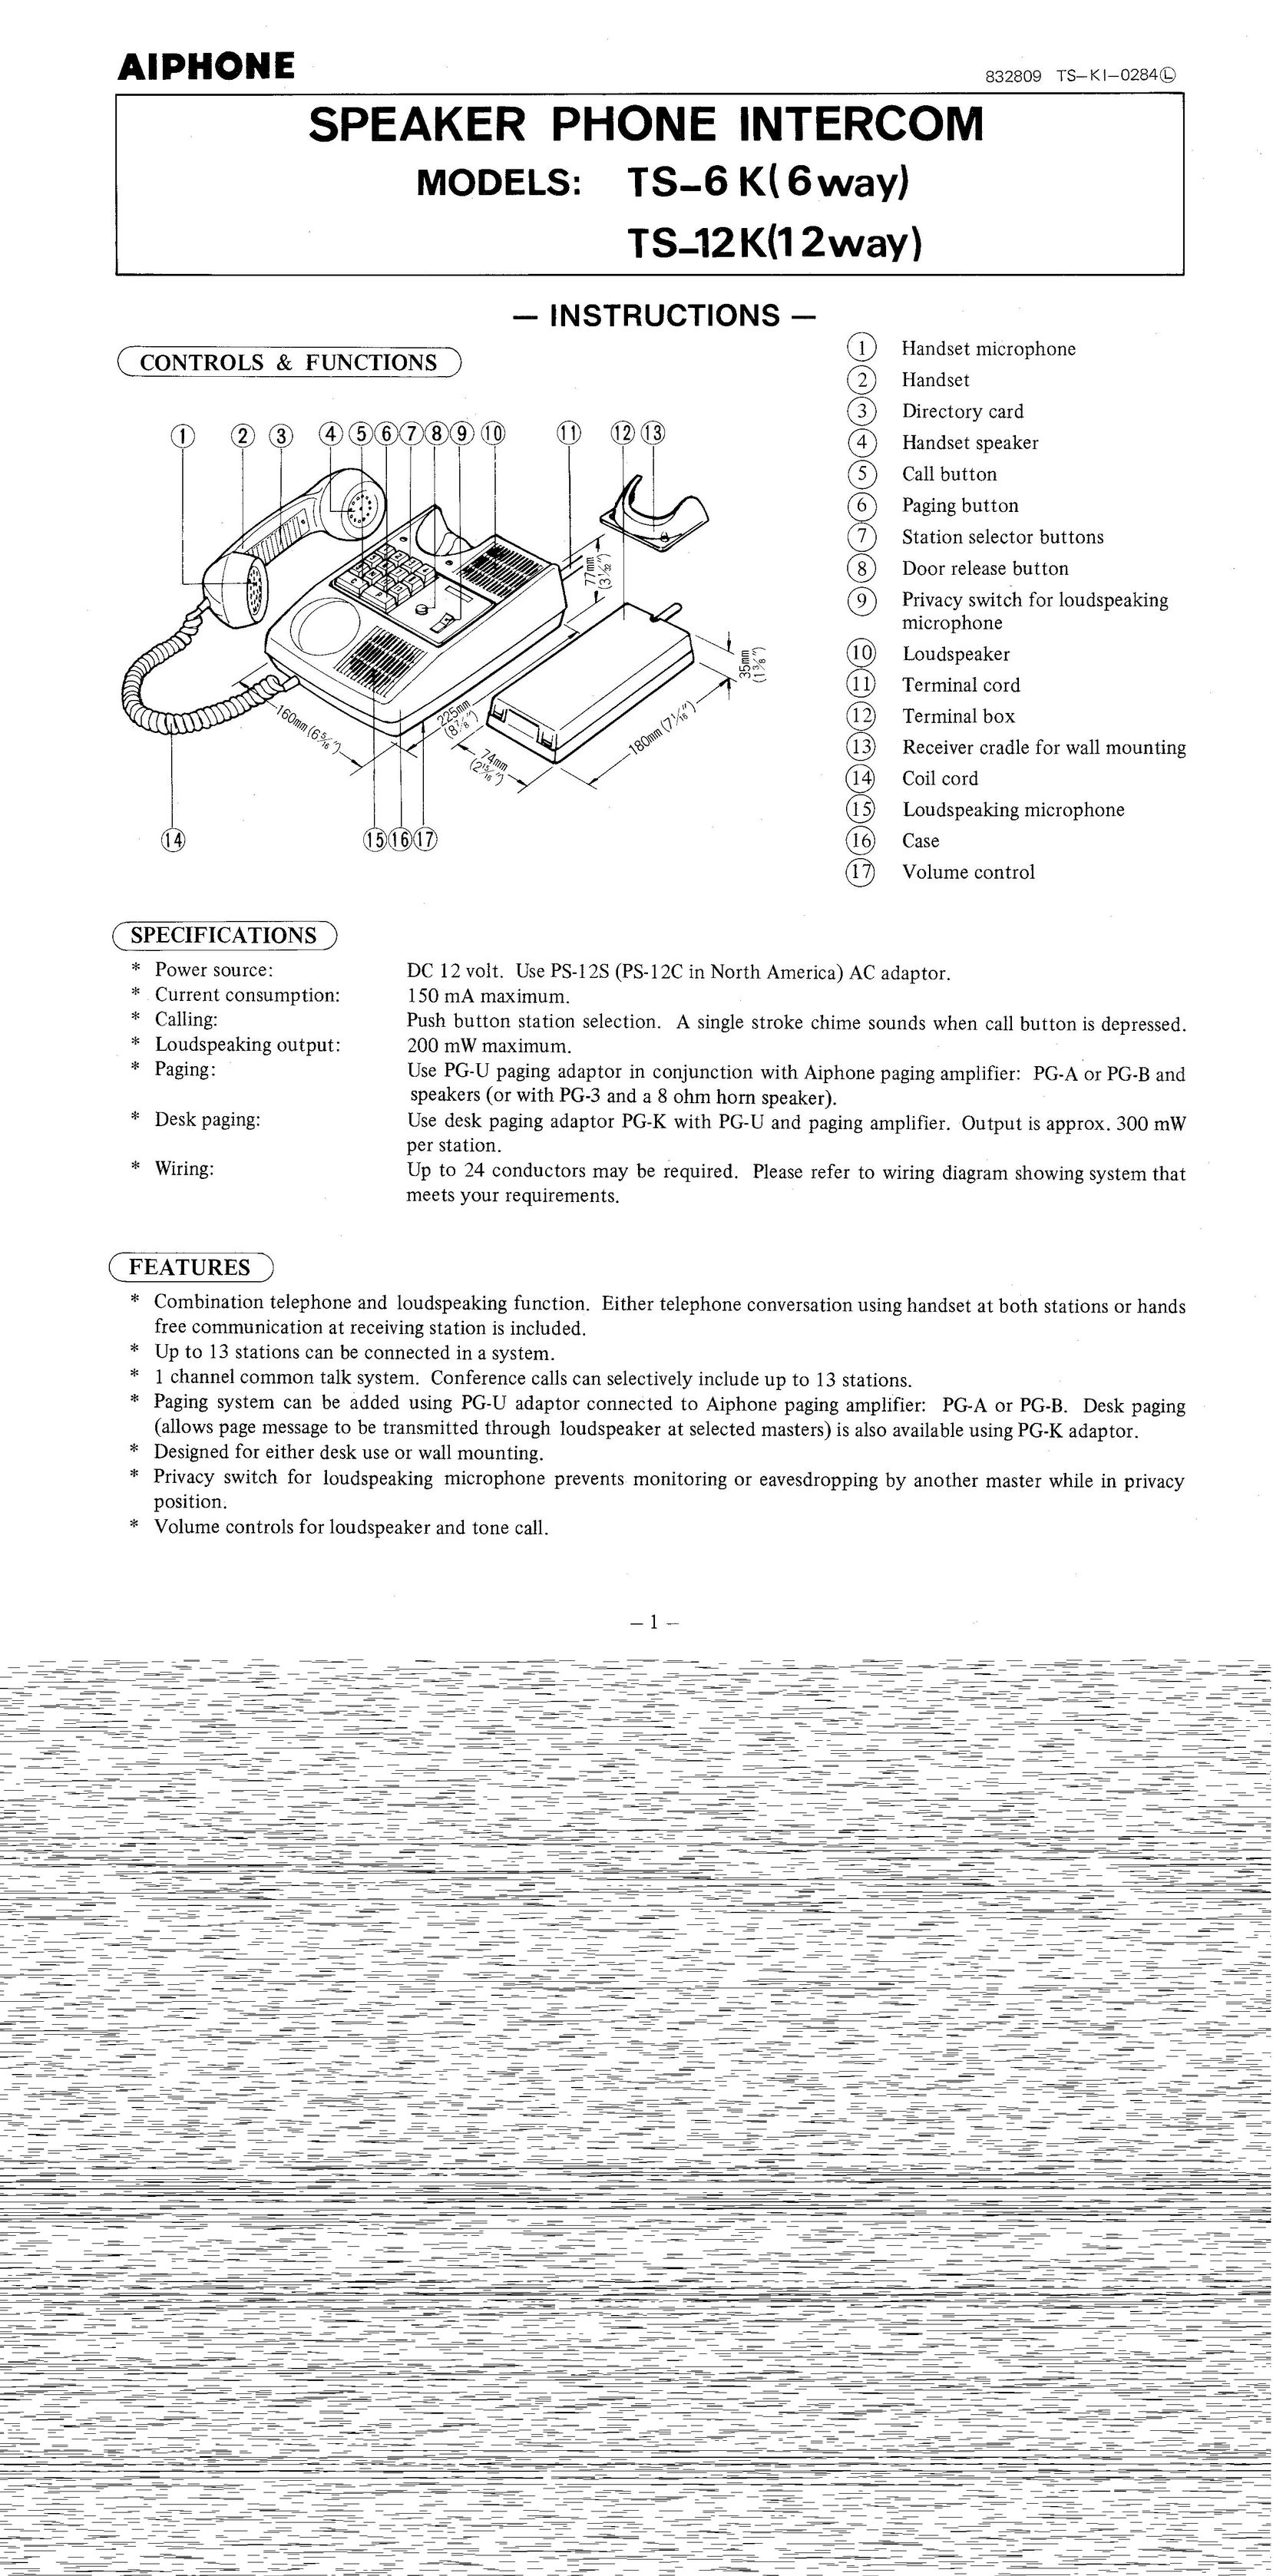 Aiphone TS-6K Conference Phone User Manual (Page 1)